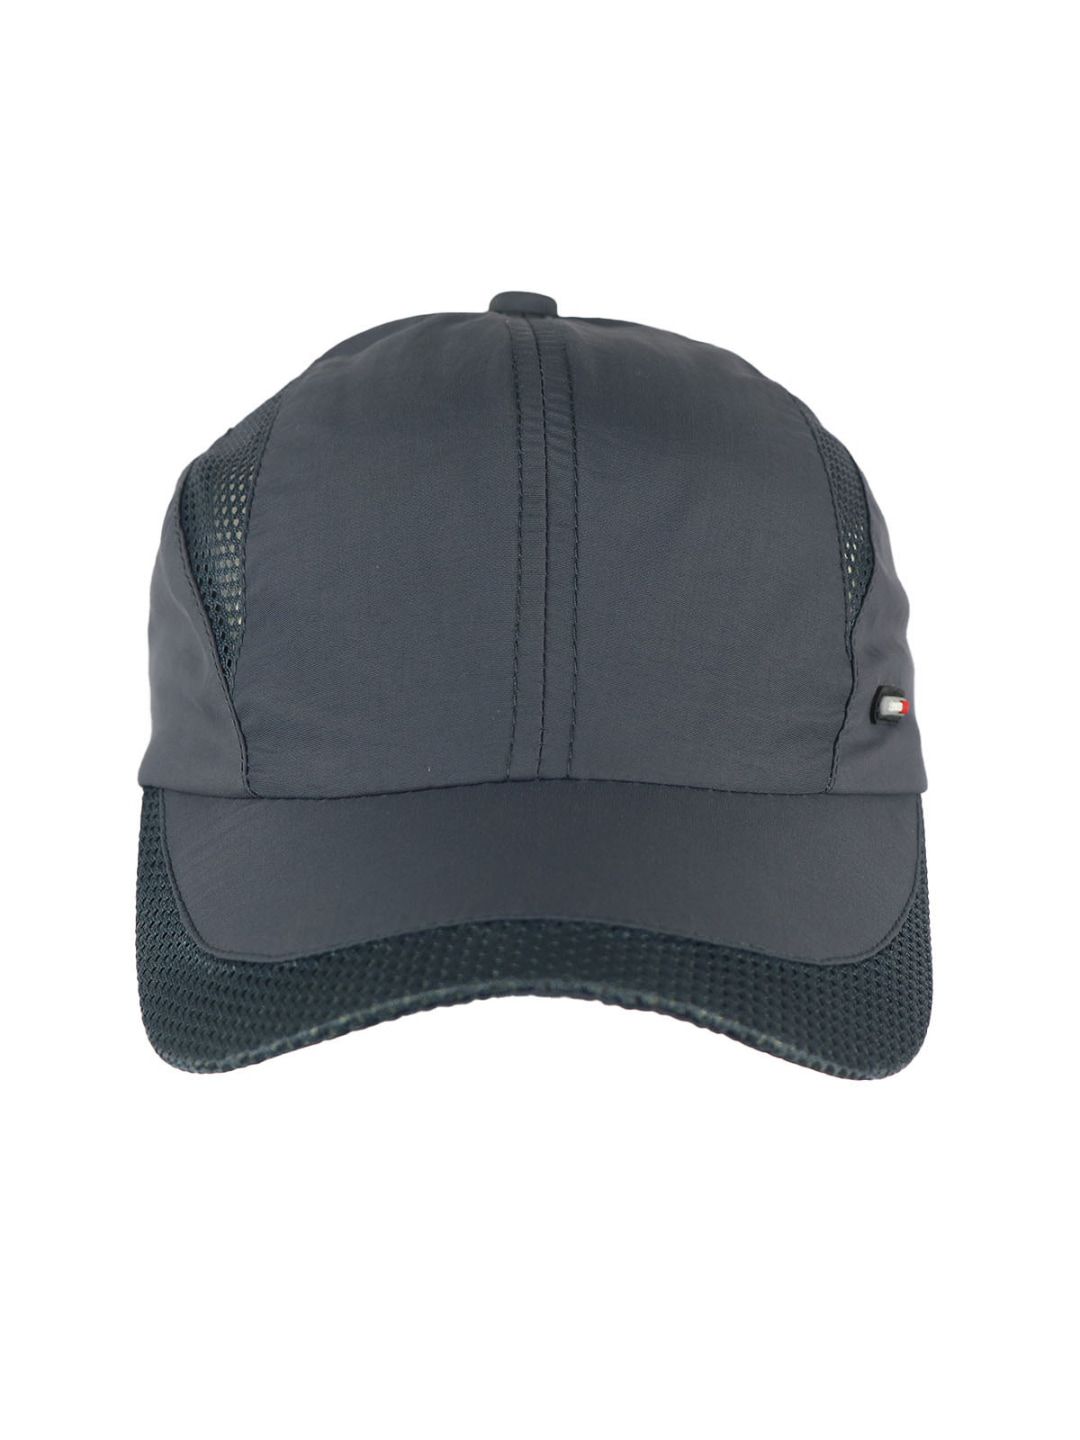 iSWEVEN Unisex Grey Solid Baseball Cap Price in India